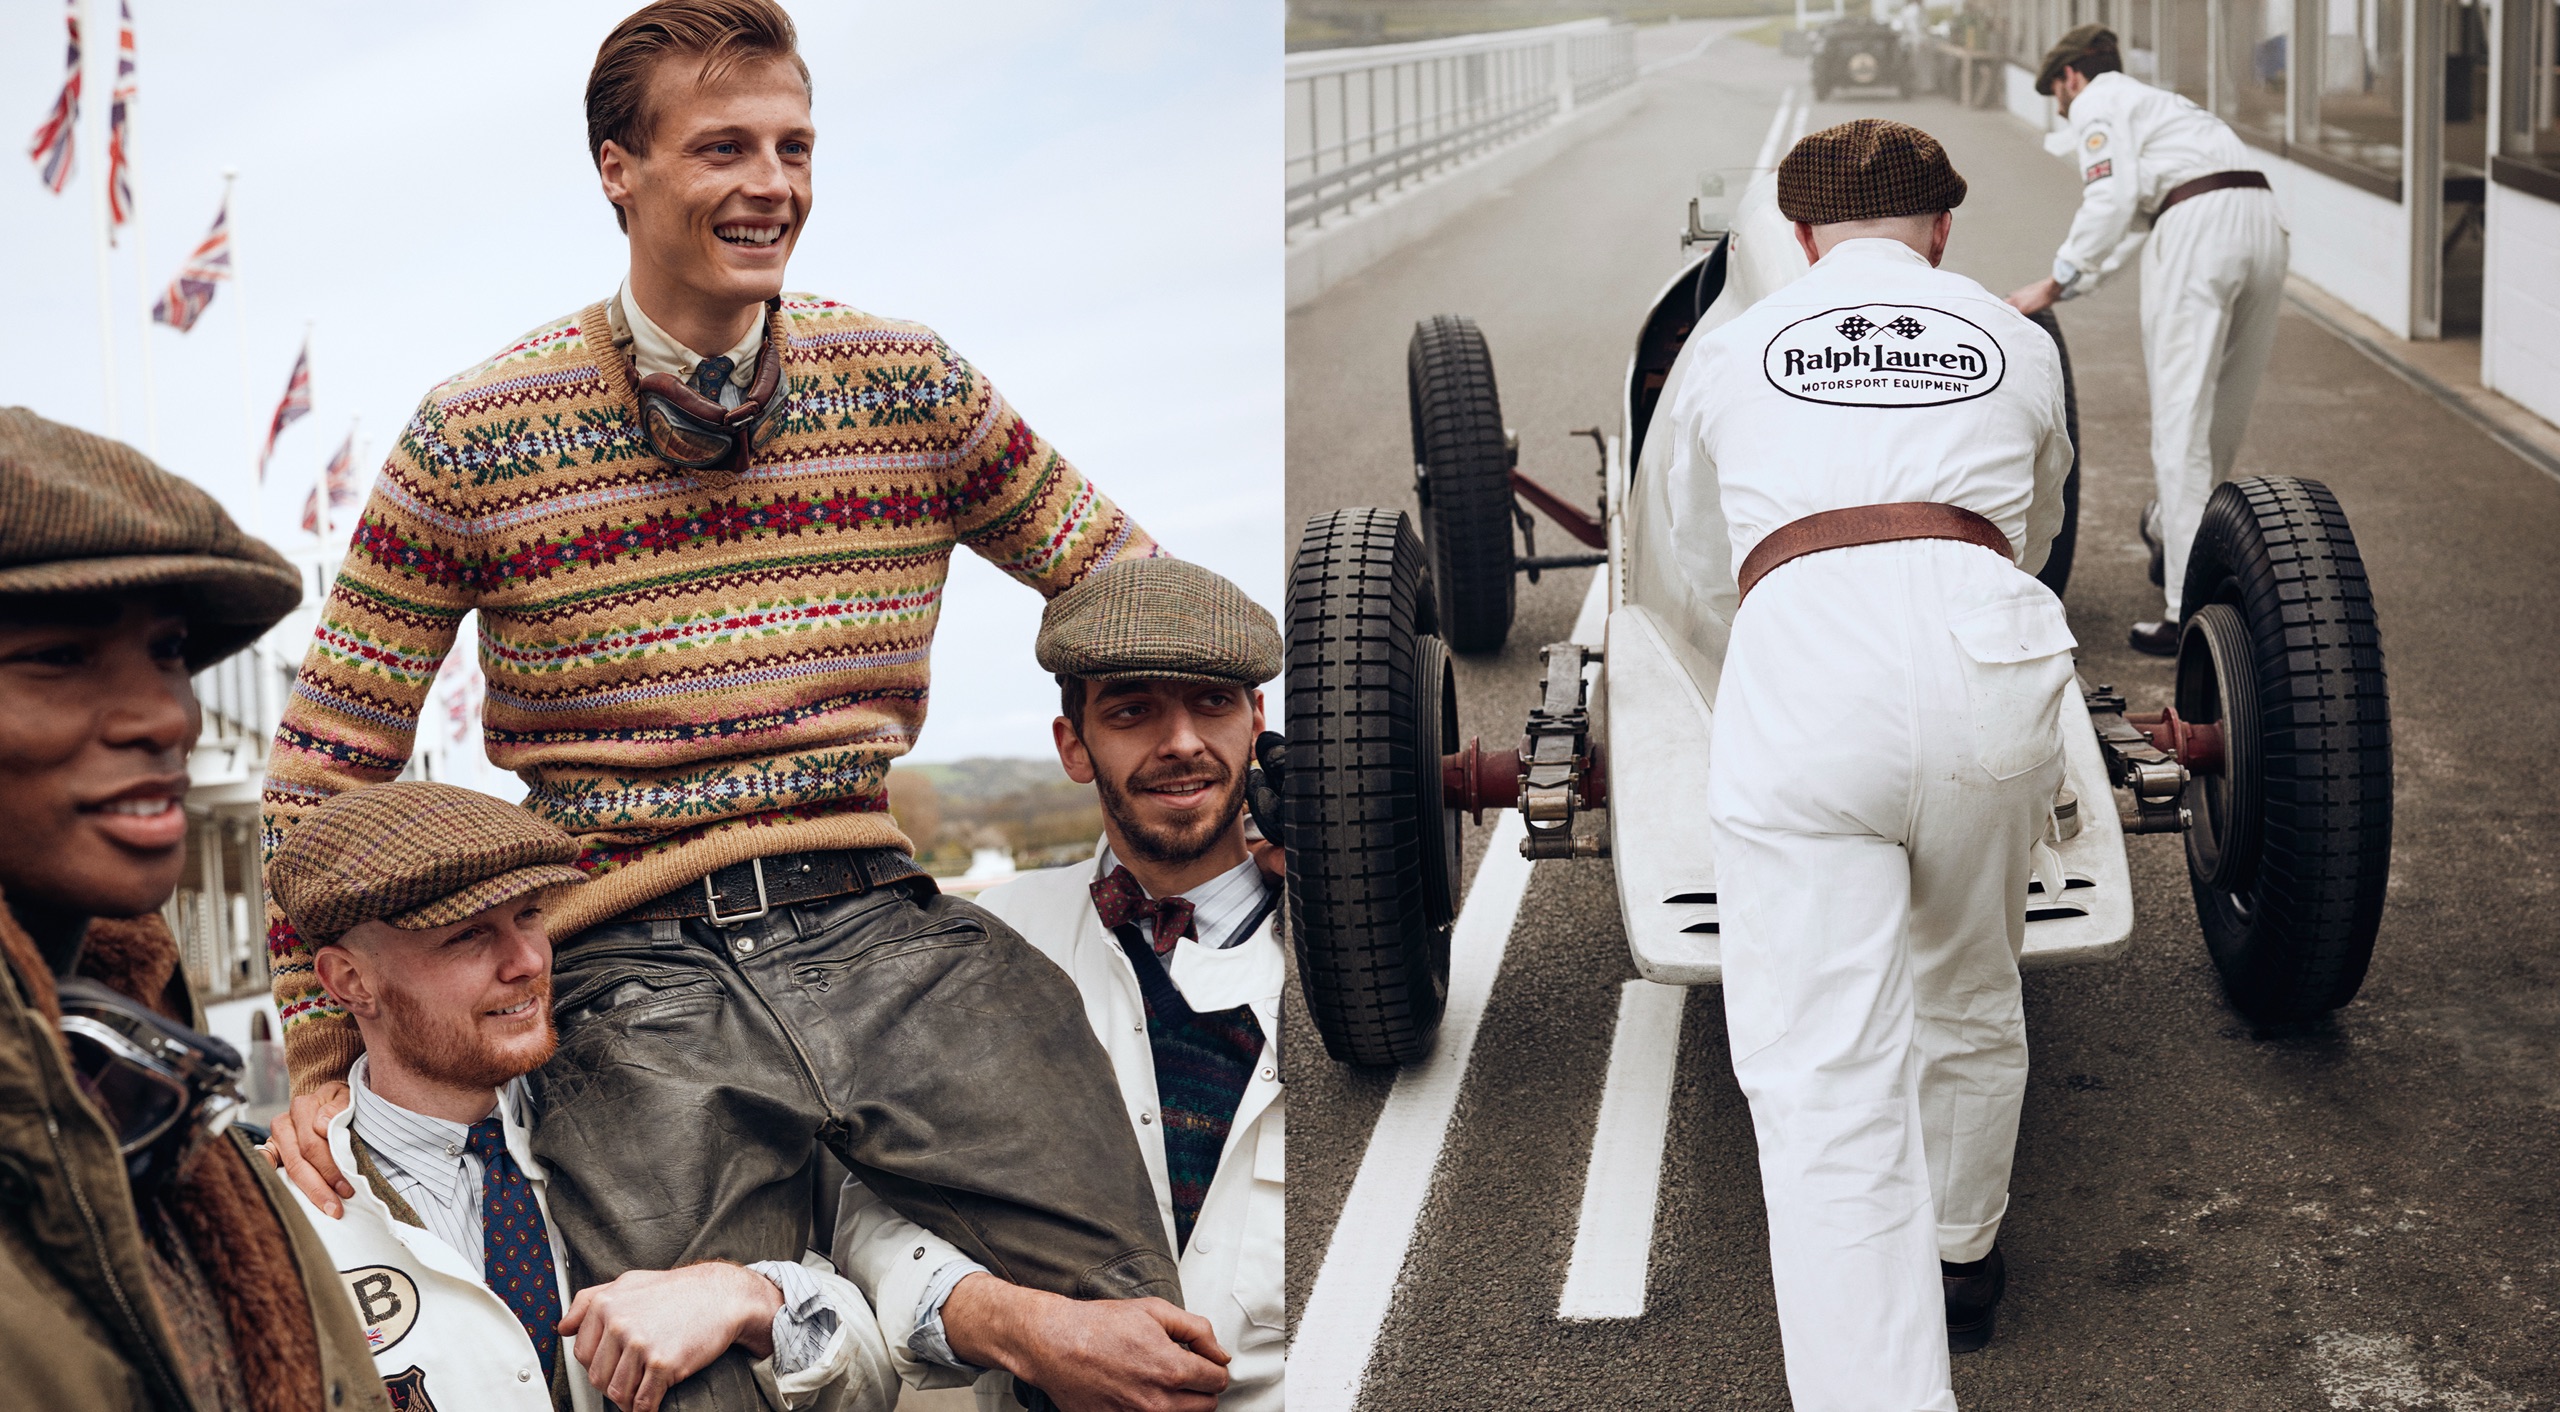 <strong>ON LOCATION</strong><br/><span>This season of Polo Originals, inspired by the golden era of Grand Prix car racing, was photographed at the Goodwood Motor Circuit, which is located in West Sussex, on the 12,000-acre Goodwood Estate. The Circuit has since become known for hosting a number of prestigious motorsport events, including the famous Festival of Speed and Revival.</span> <br/><rlmag_link href="https://www.ralphlauren.fr/en/search?cgid=brands-prl-tough-and-refined-cg"><button class="shop-collection">Shop the Story</button></rlmag_link>